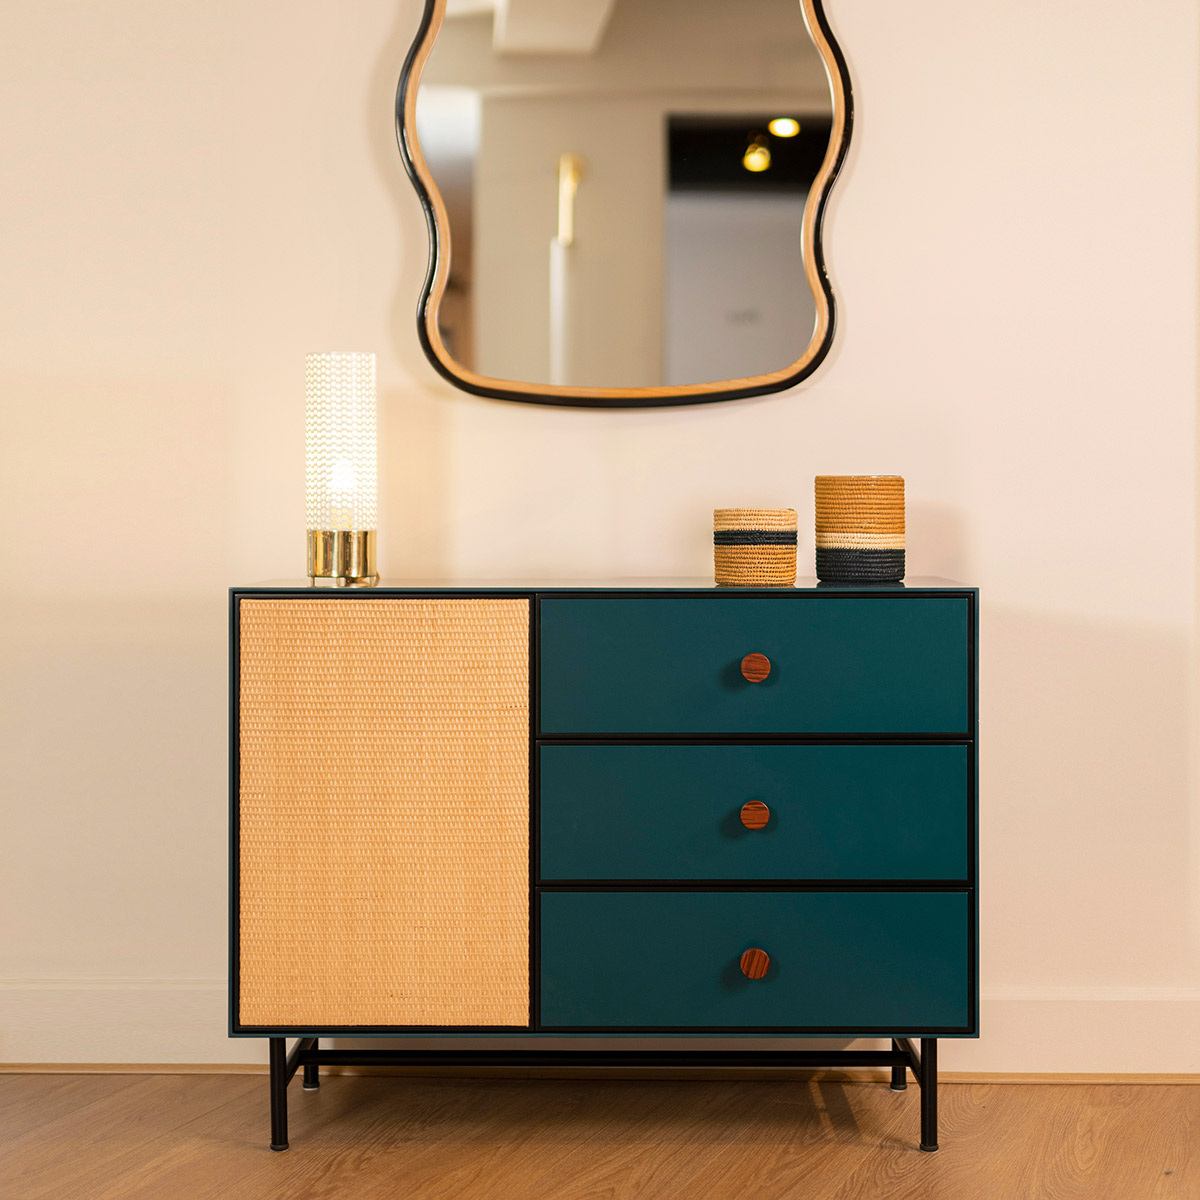 Chest of Drawers Essence, Green / Black - L100 x W45 x H75 cm - Lacquered wood - image 7